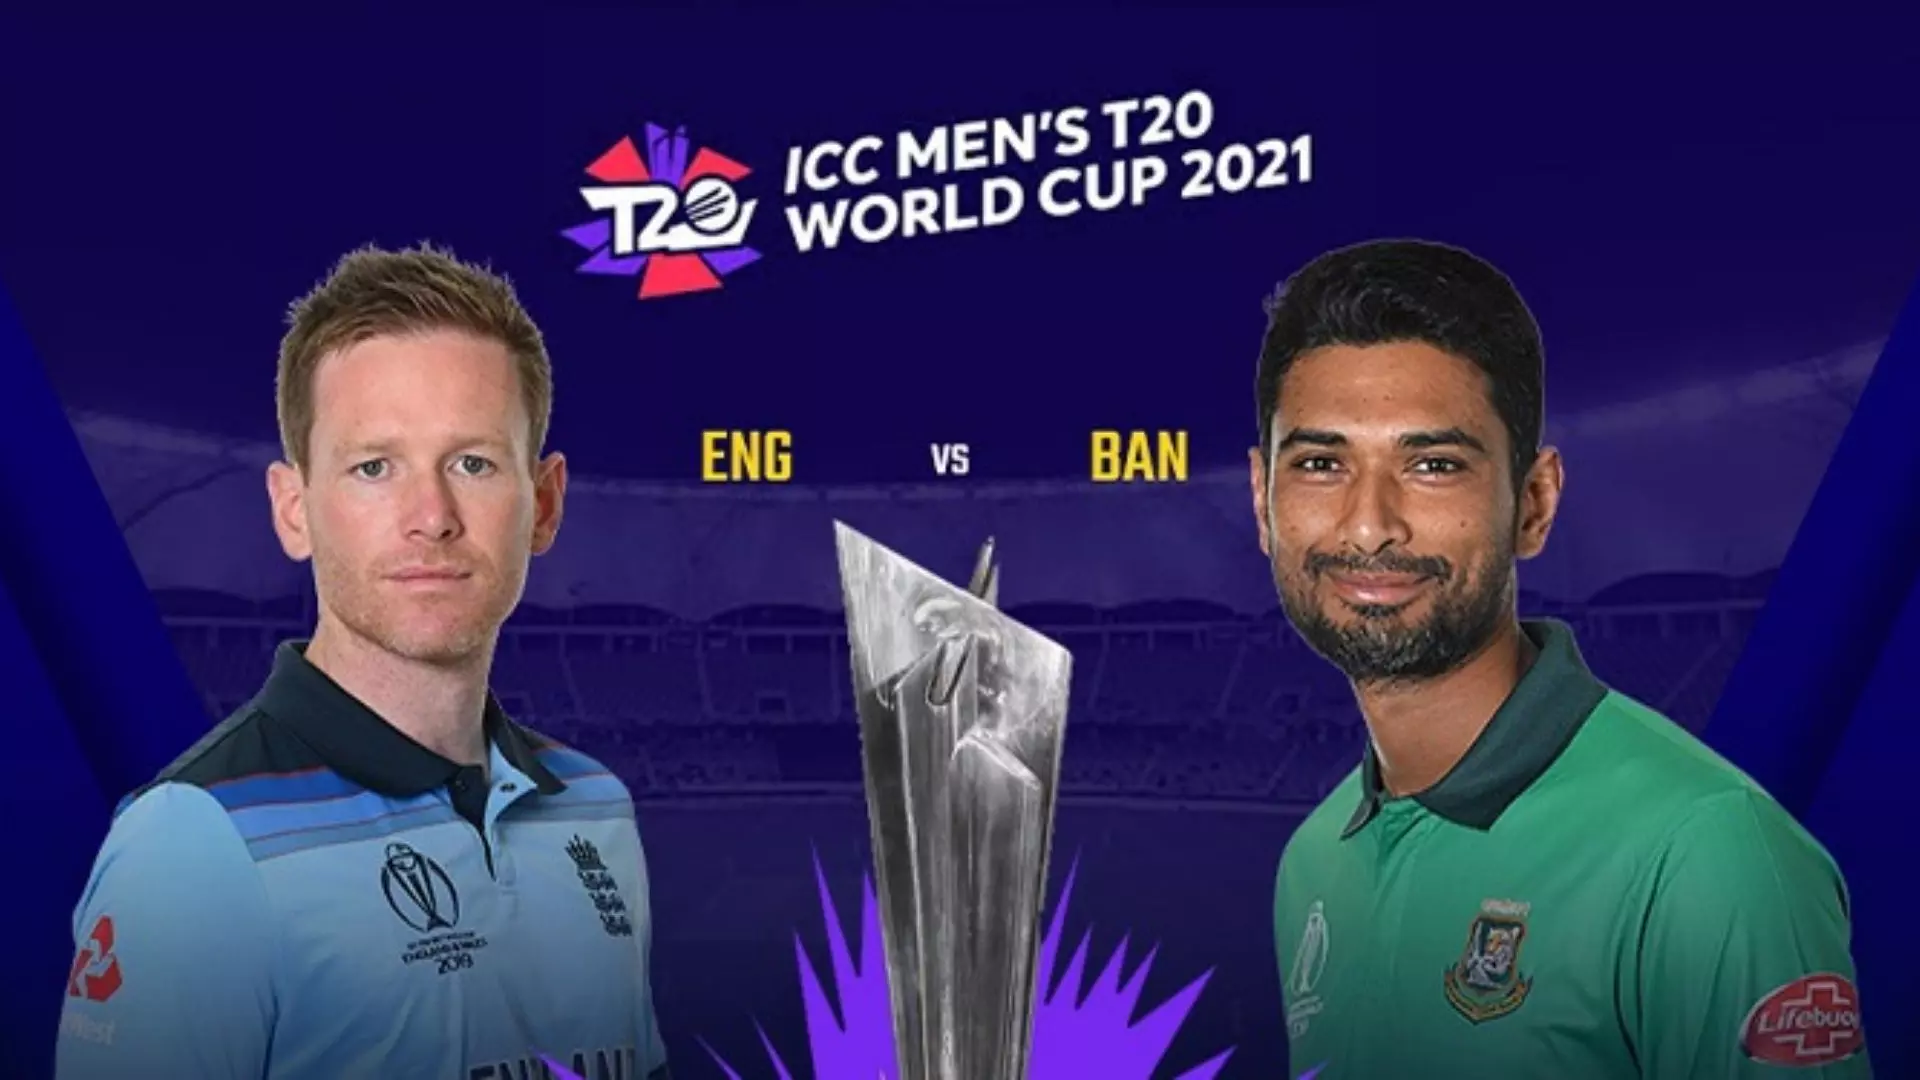 T20 World Cup 2021 - Today England Vs Bangladesh Match Preview 27th October 2021